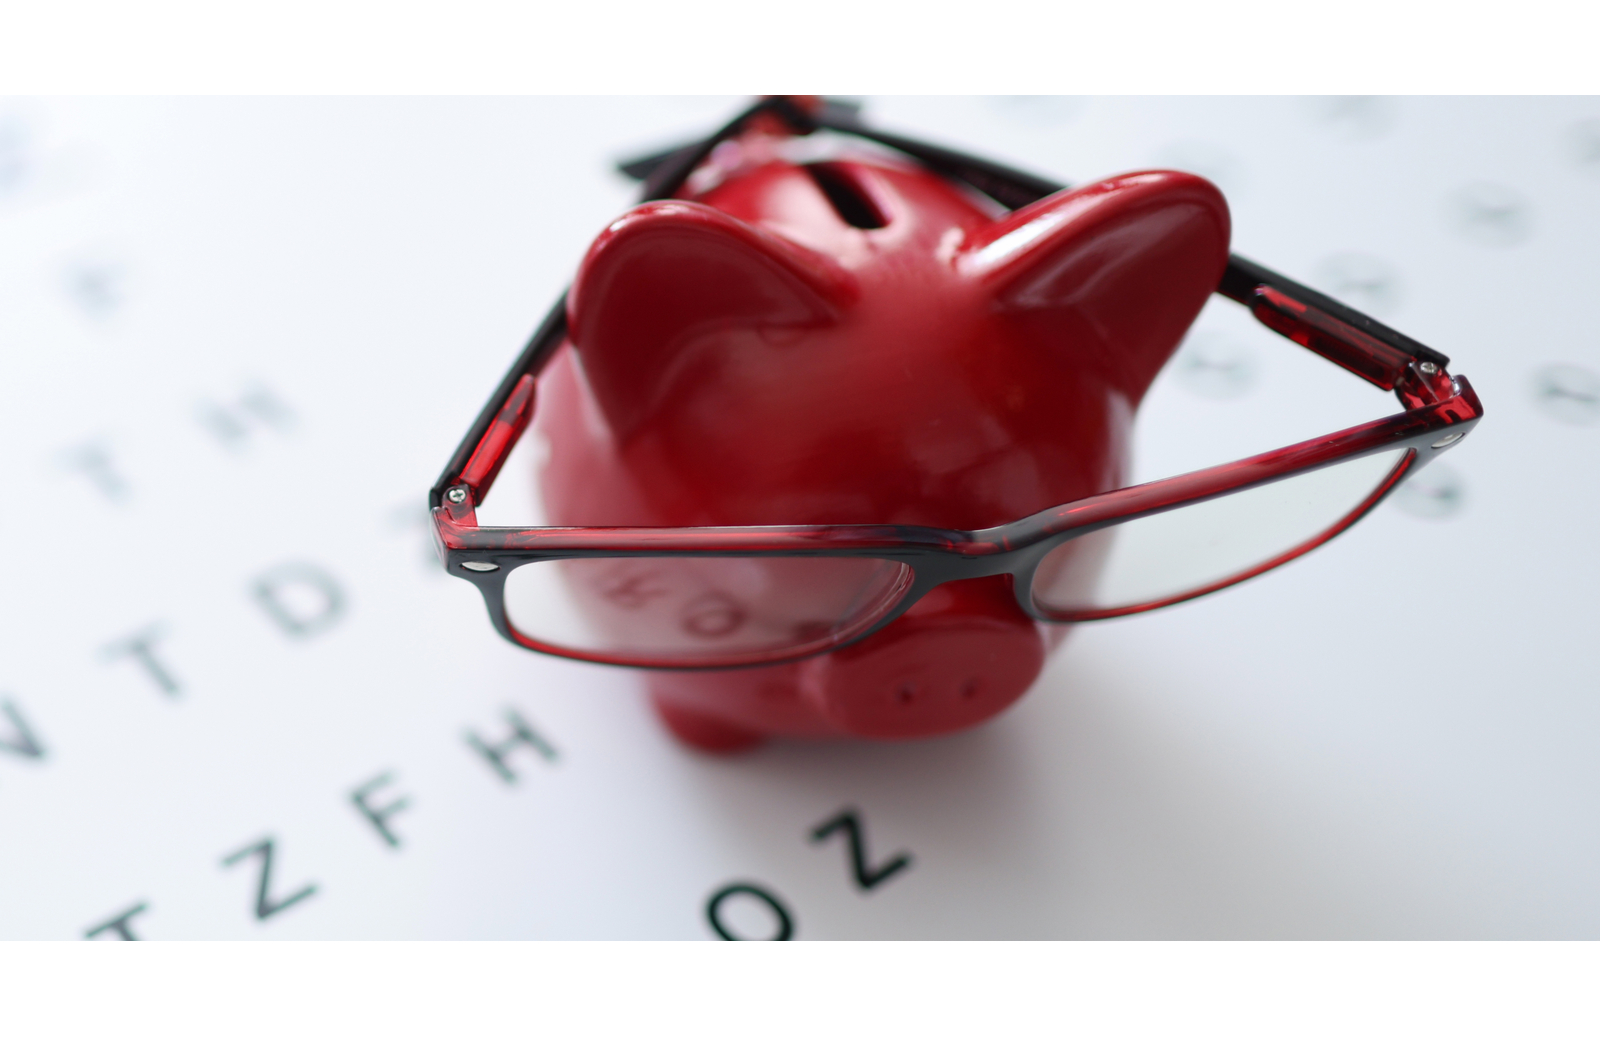 Piggy bank with glasses on top to portray eye insurance and if insurance covers LipiFlow